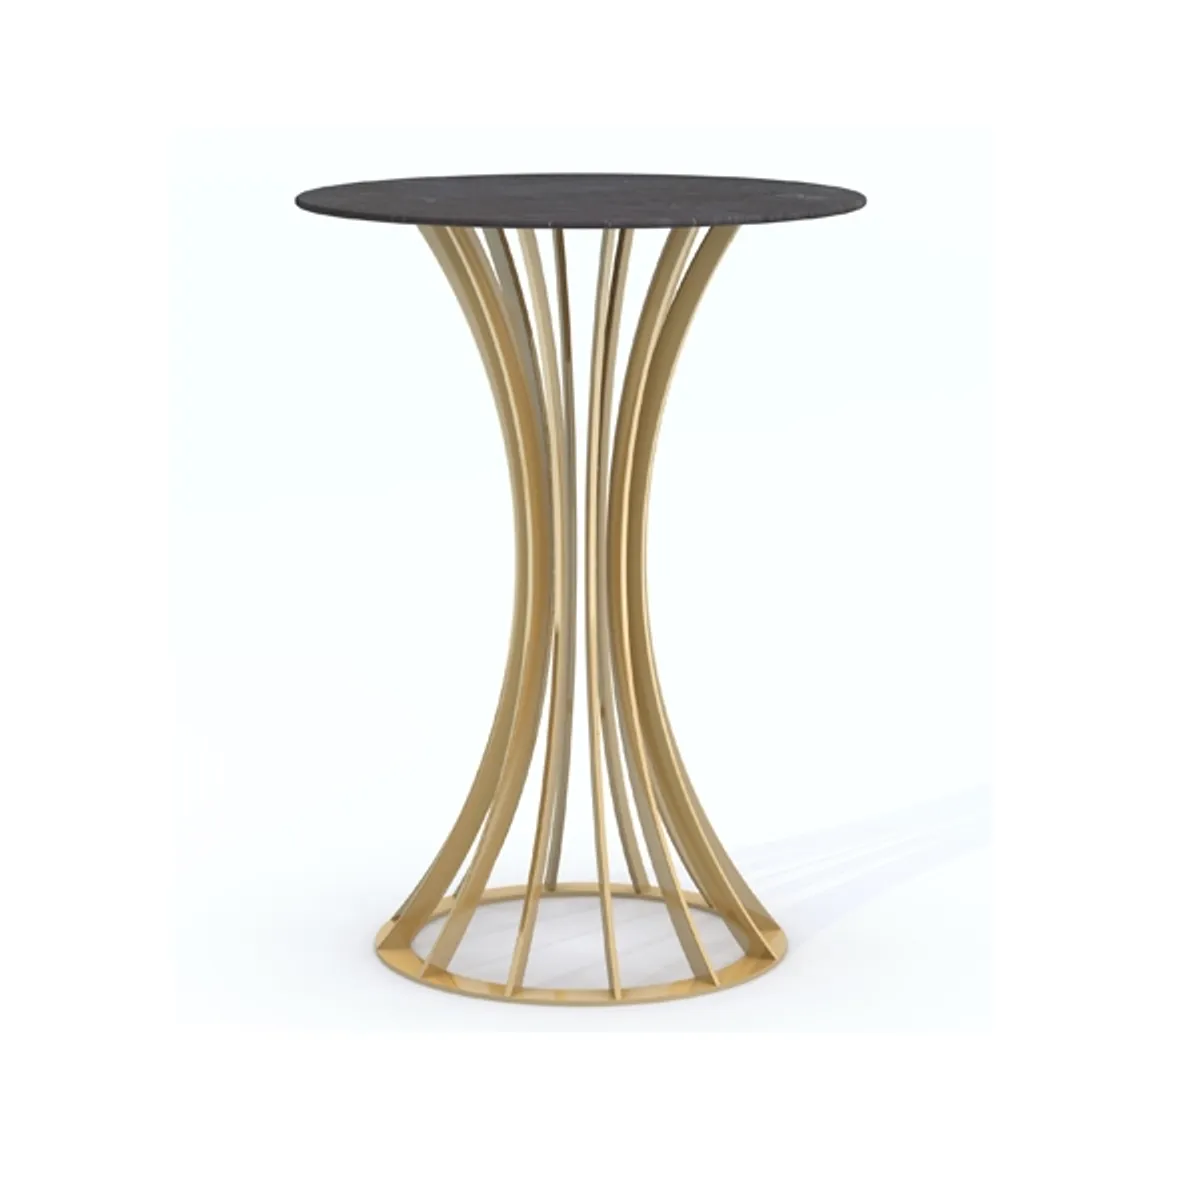 Blondelle table Inside Out Contracts5